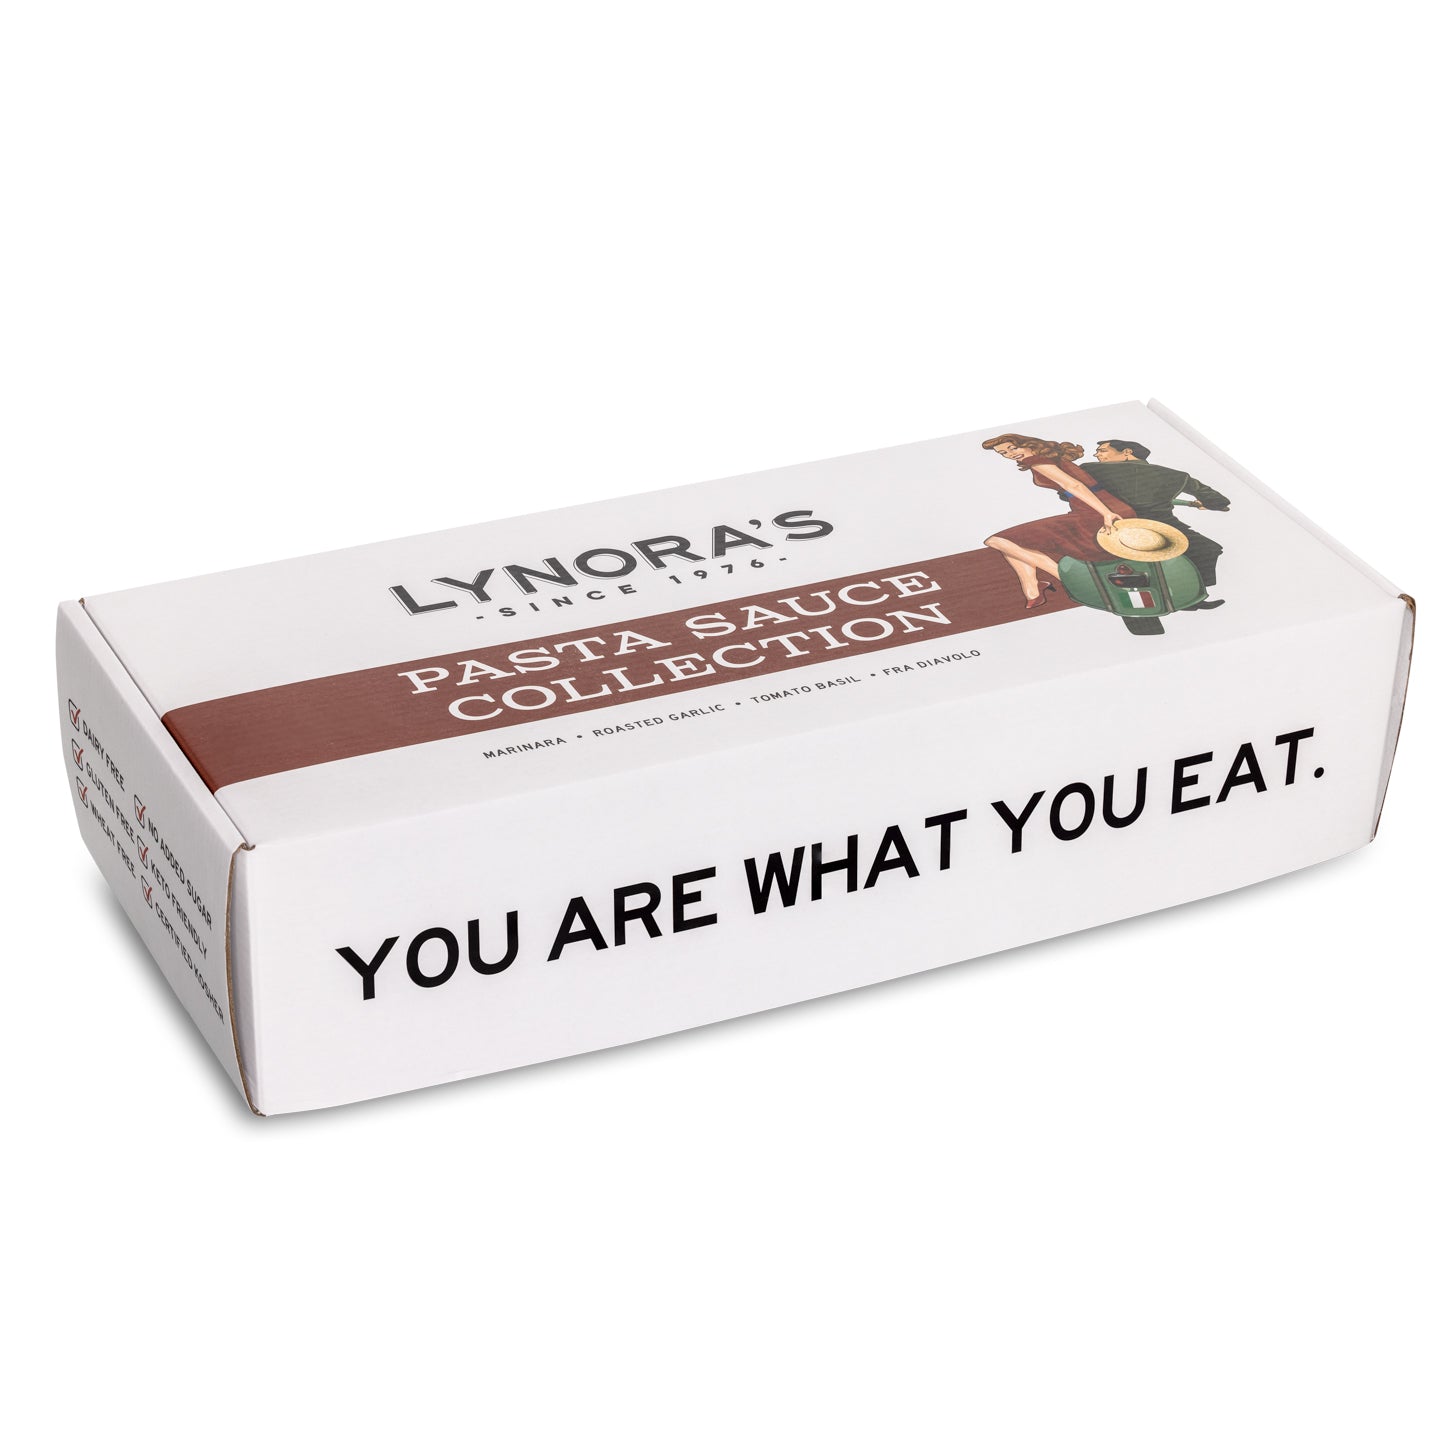 Lynora's Sauces Variety Pack